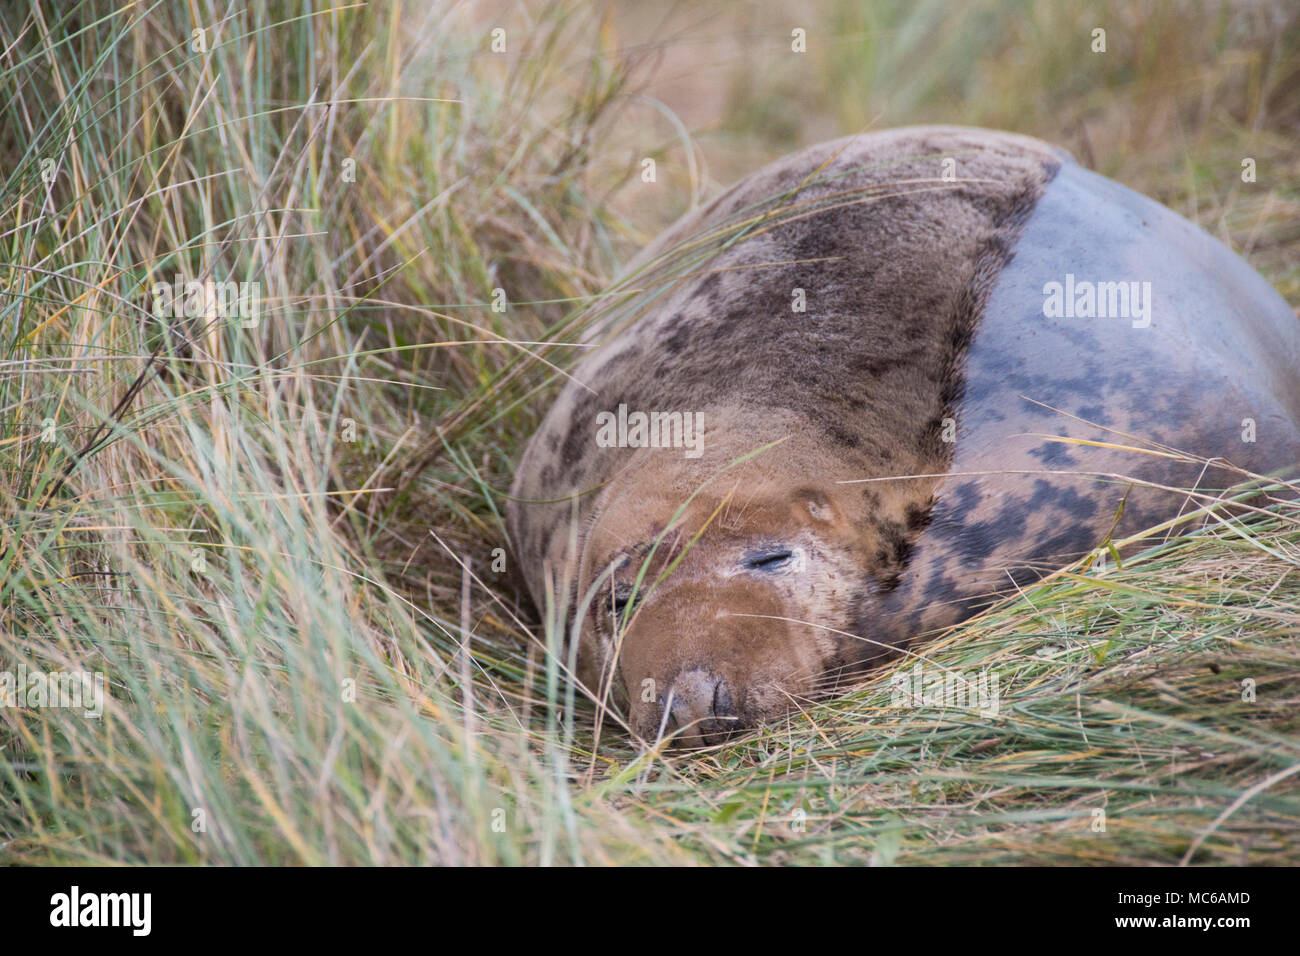 Donna Nook, Lincolnshire, UK – Nov 15: A grey seal come ashore for birthing season lies on the grass on 15 Nov 2016 at Donna Nook Seal Sanctuary Stock Photo